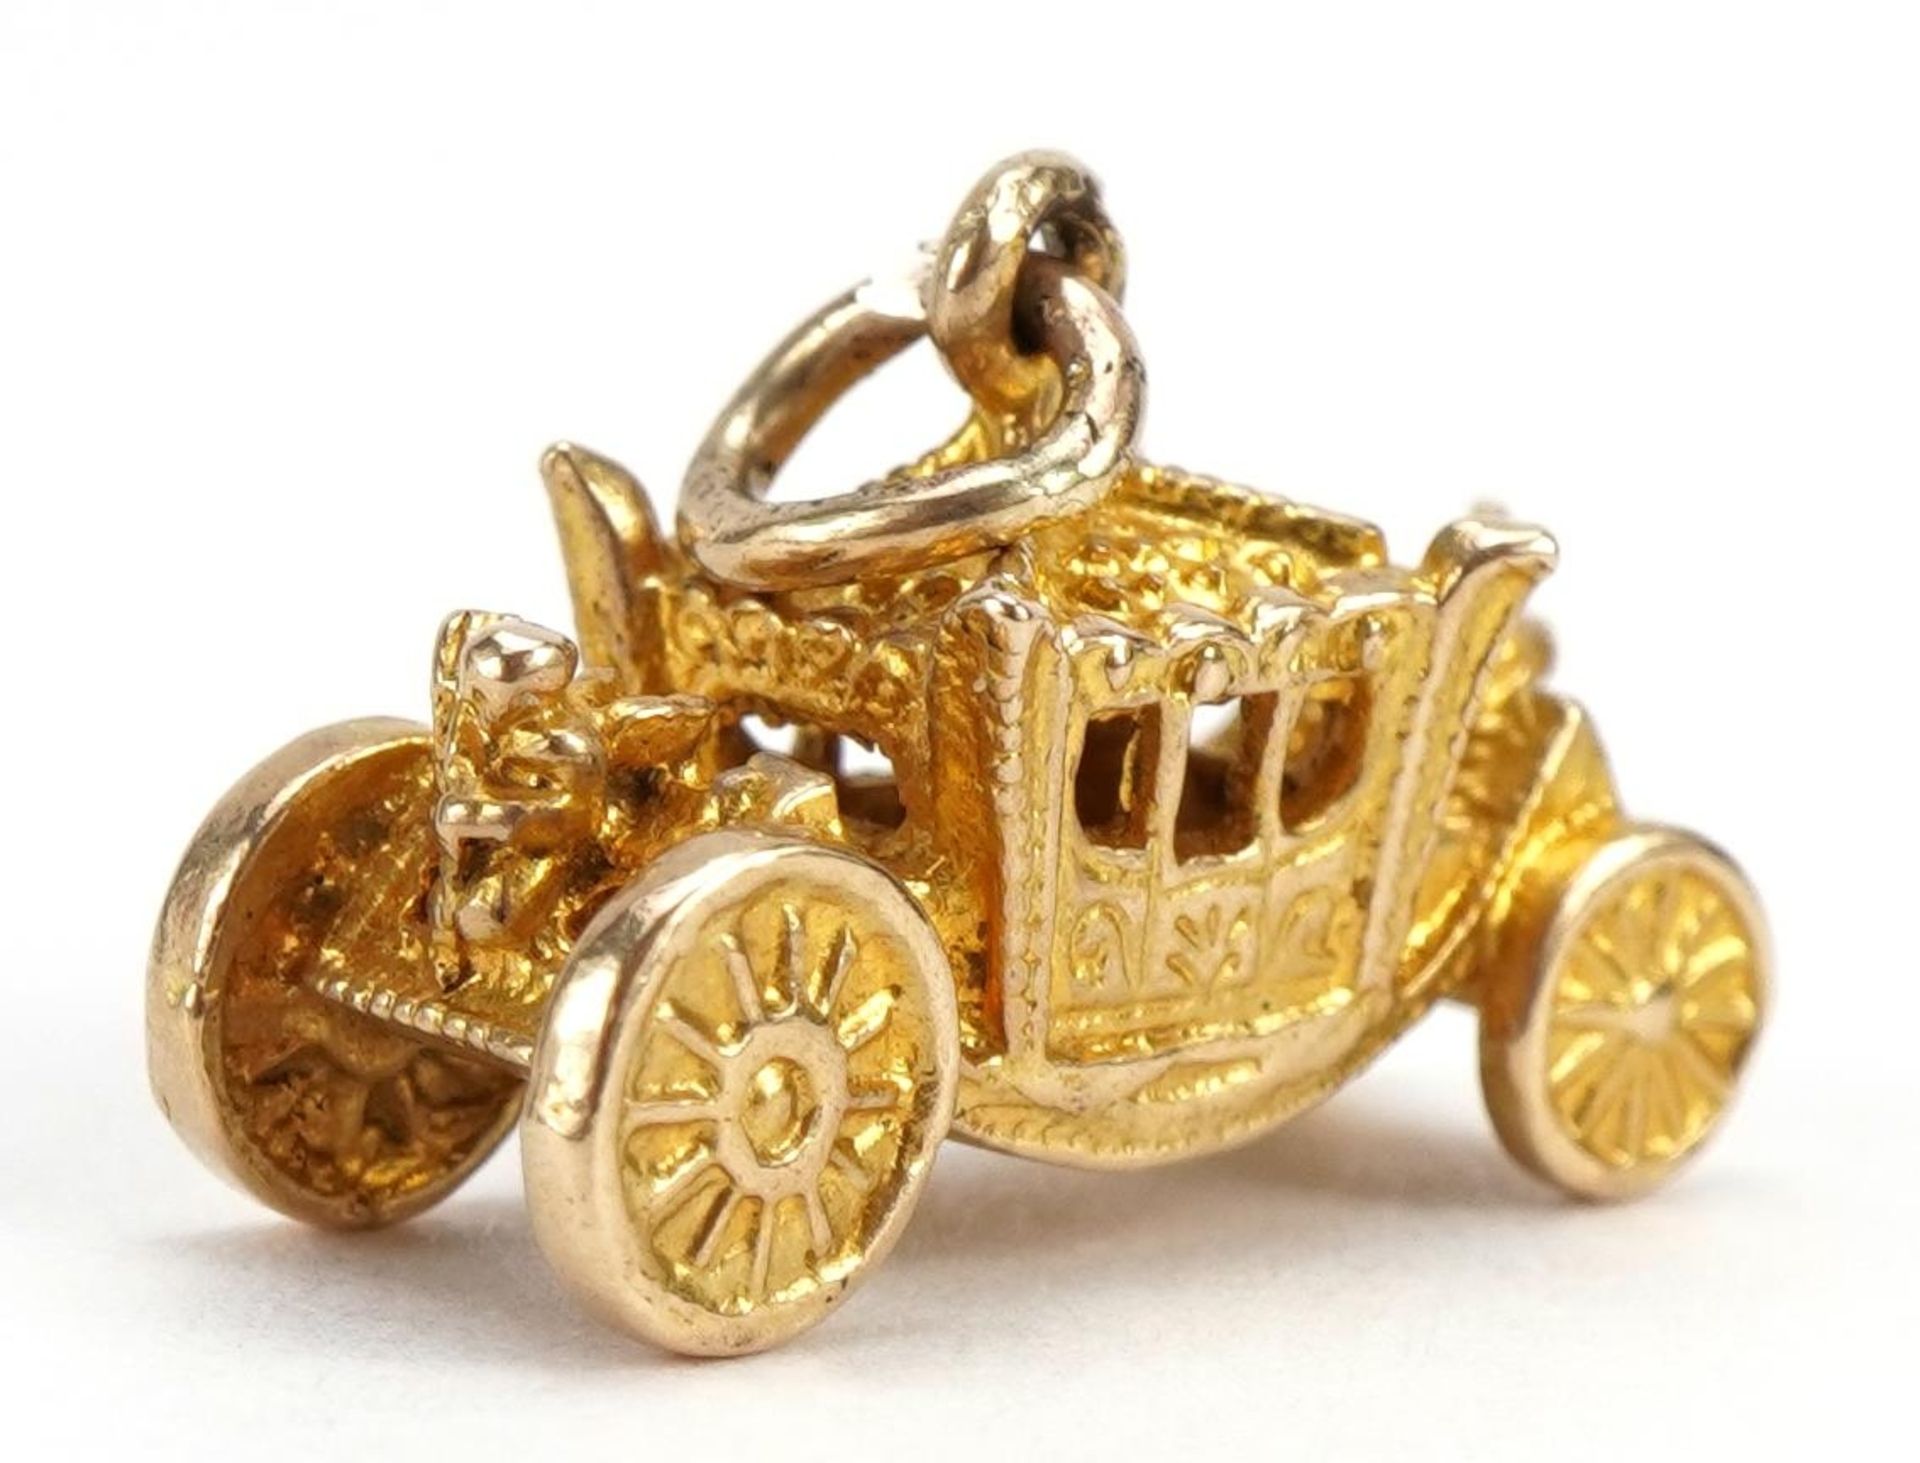 9ct gold royal carriage charm, 1.8cm wide, 2.9g